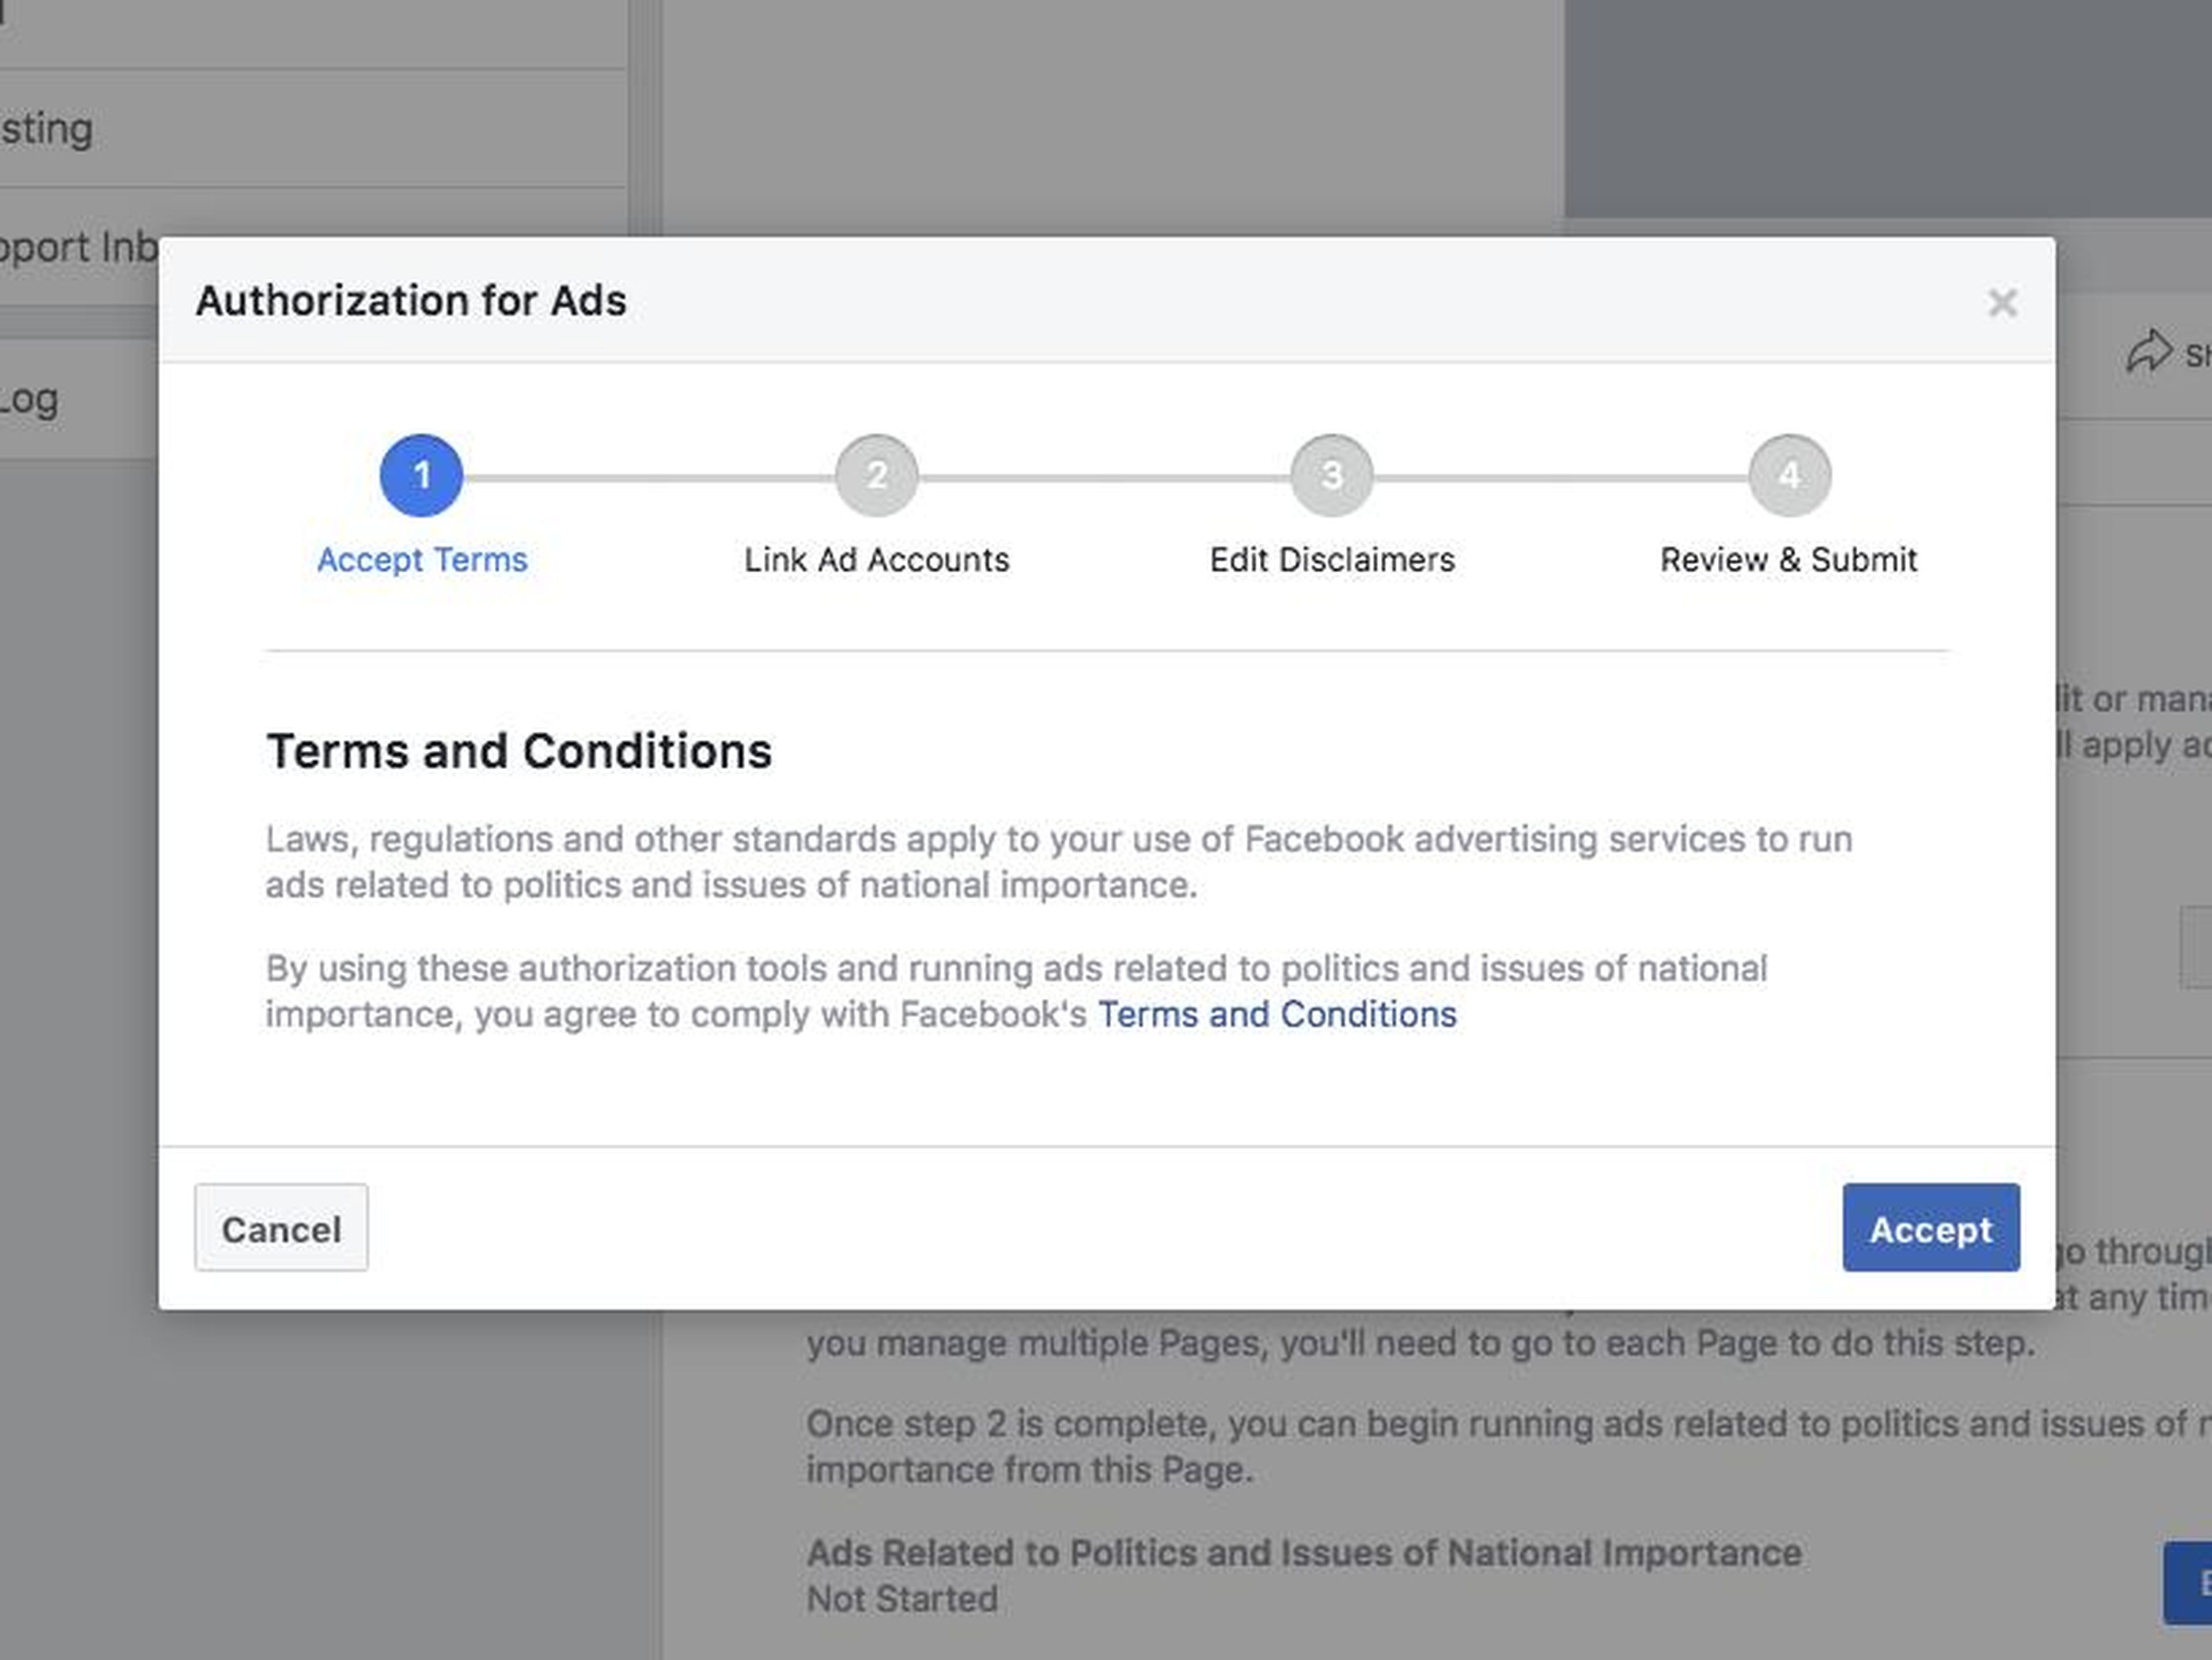 Facebook's authorization process for users wanting to post political ads on its site and apps.